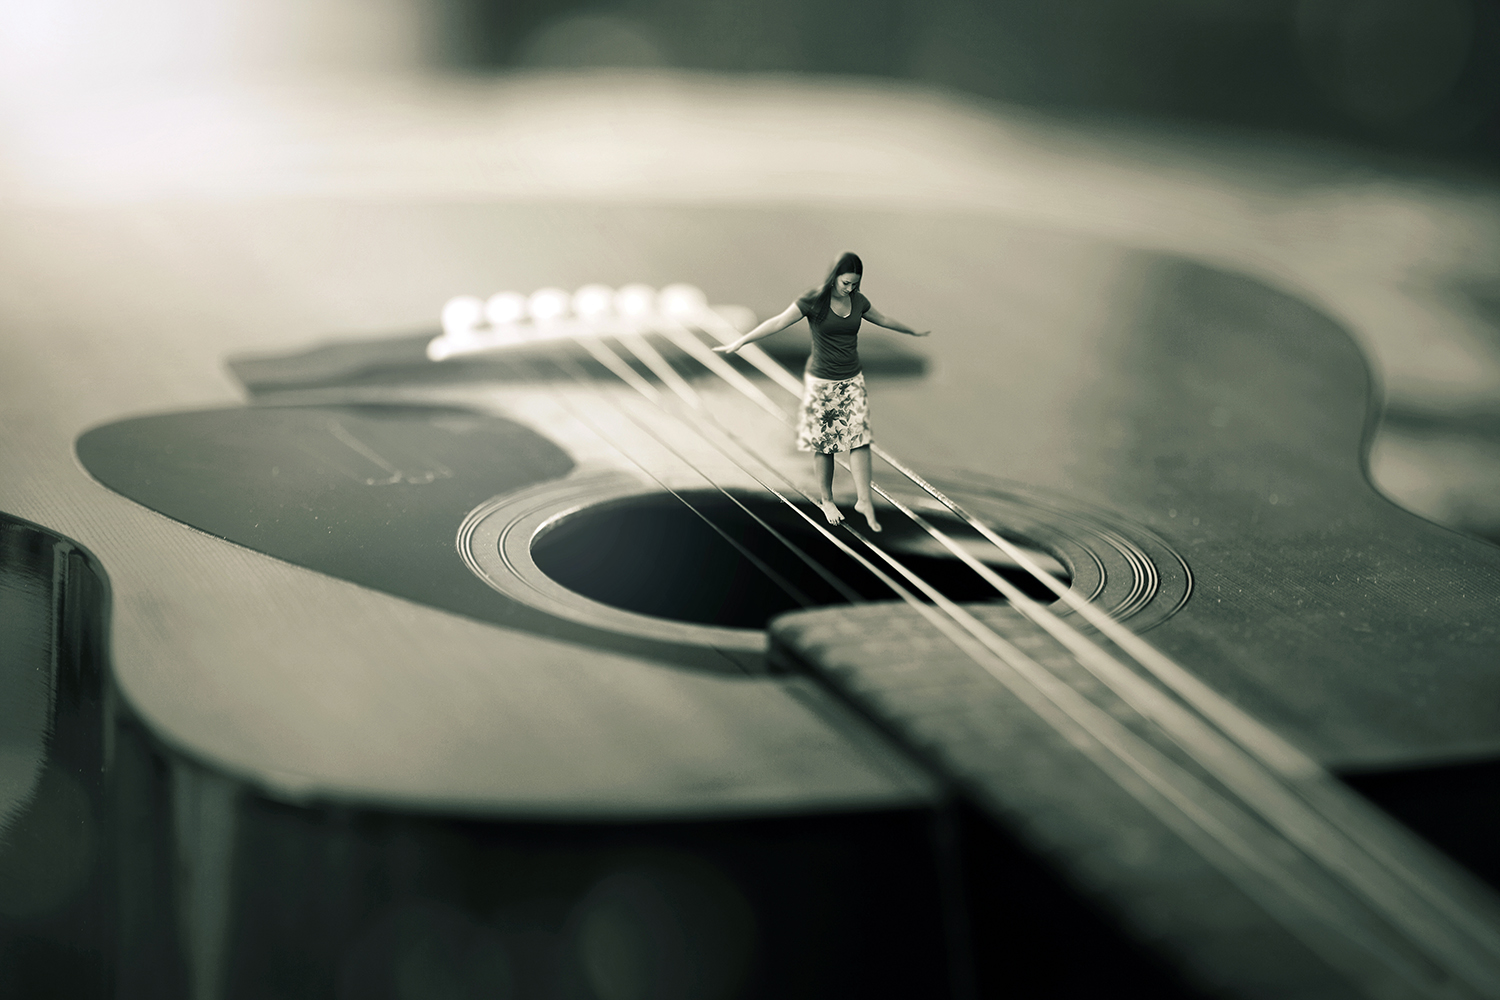 A surreal image of a woman balancing on strings of a guitar